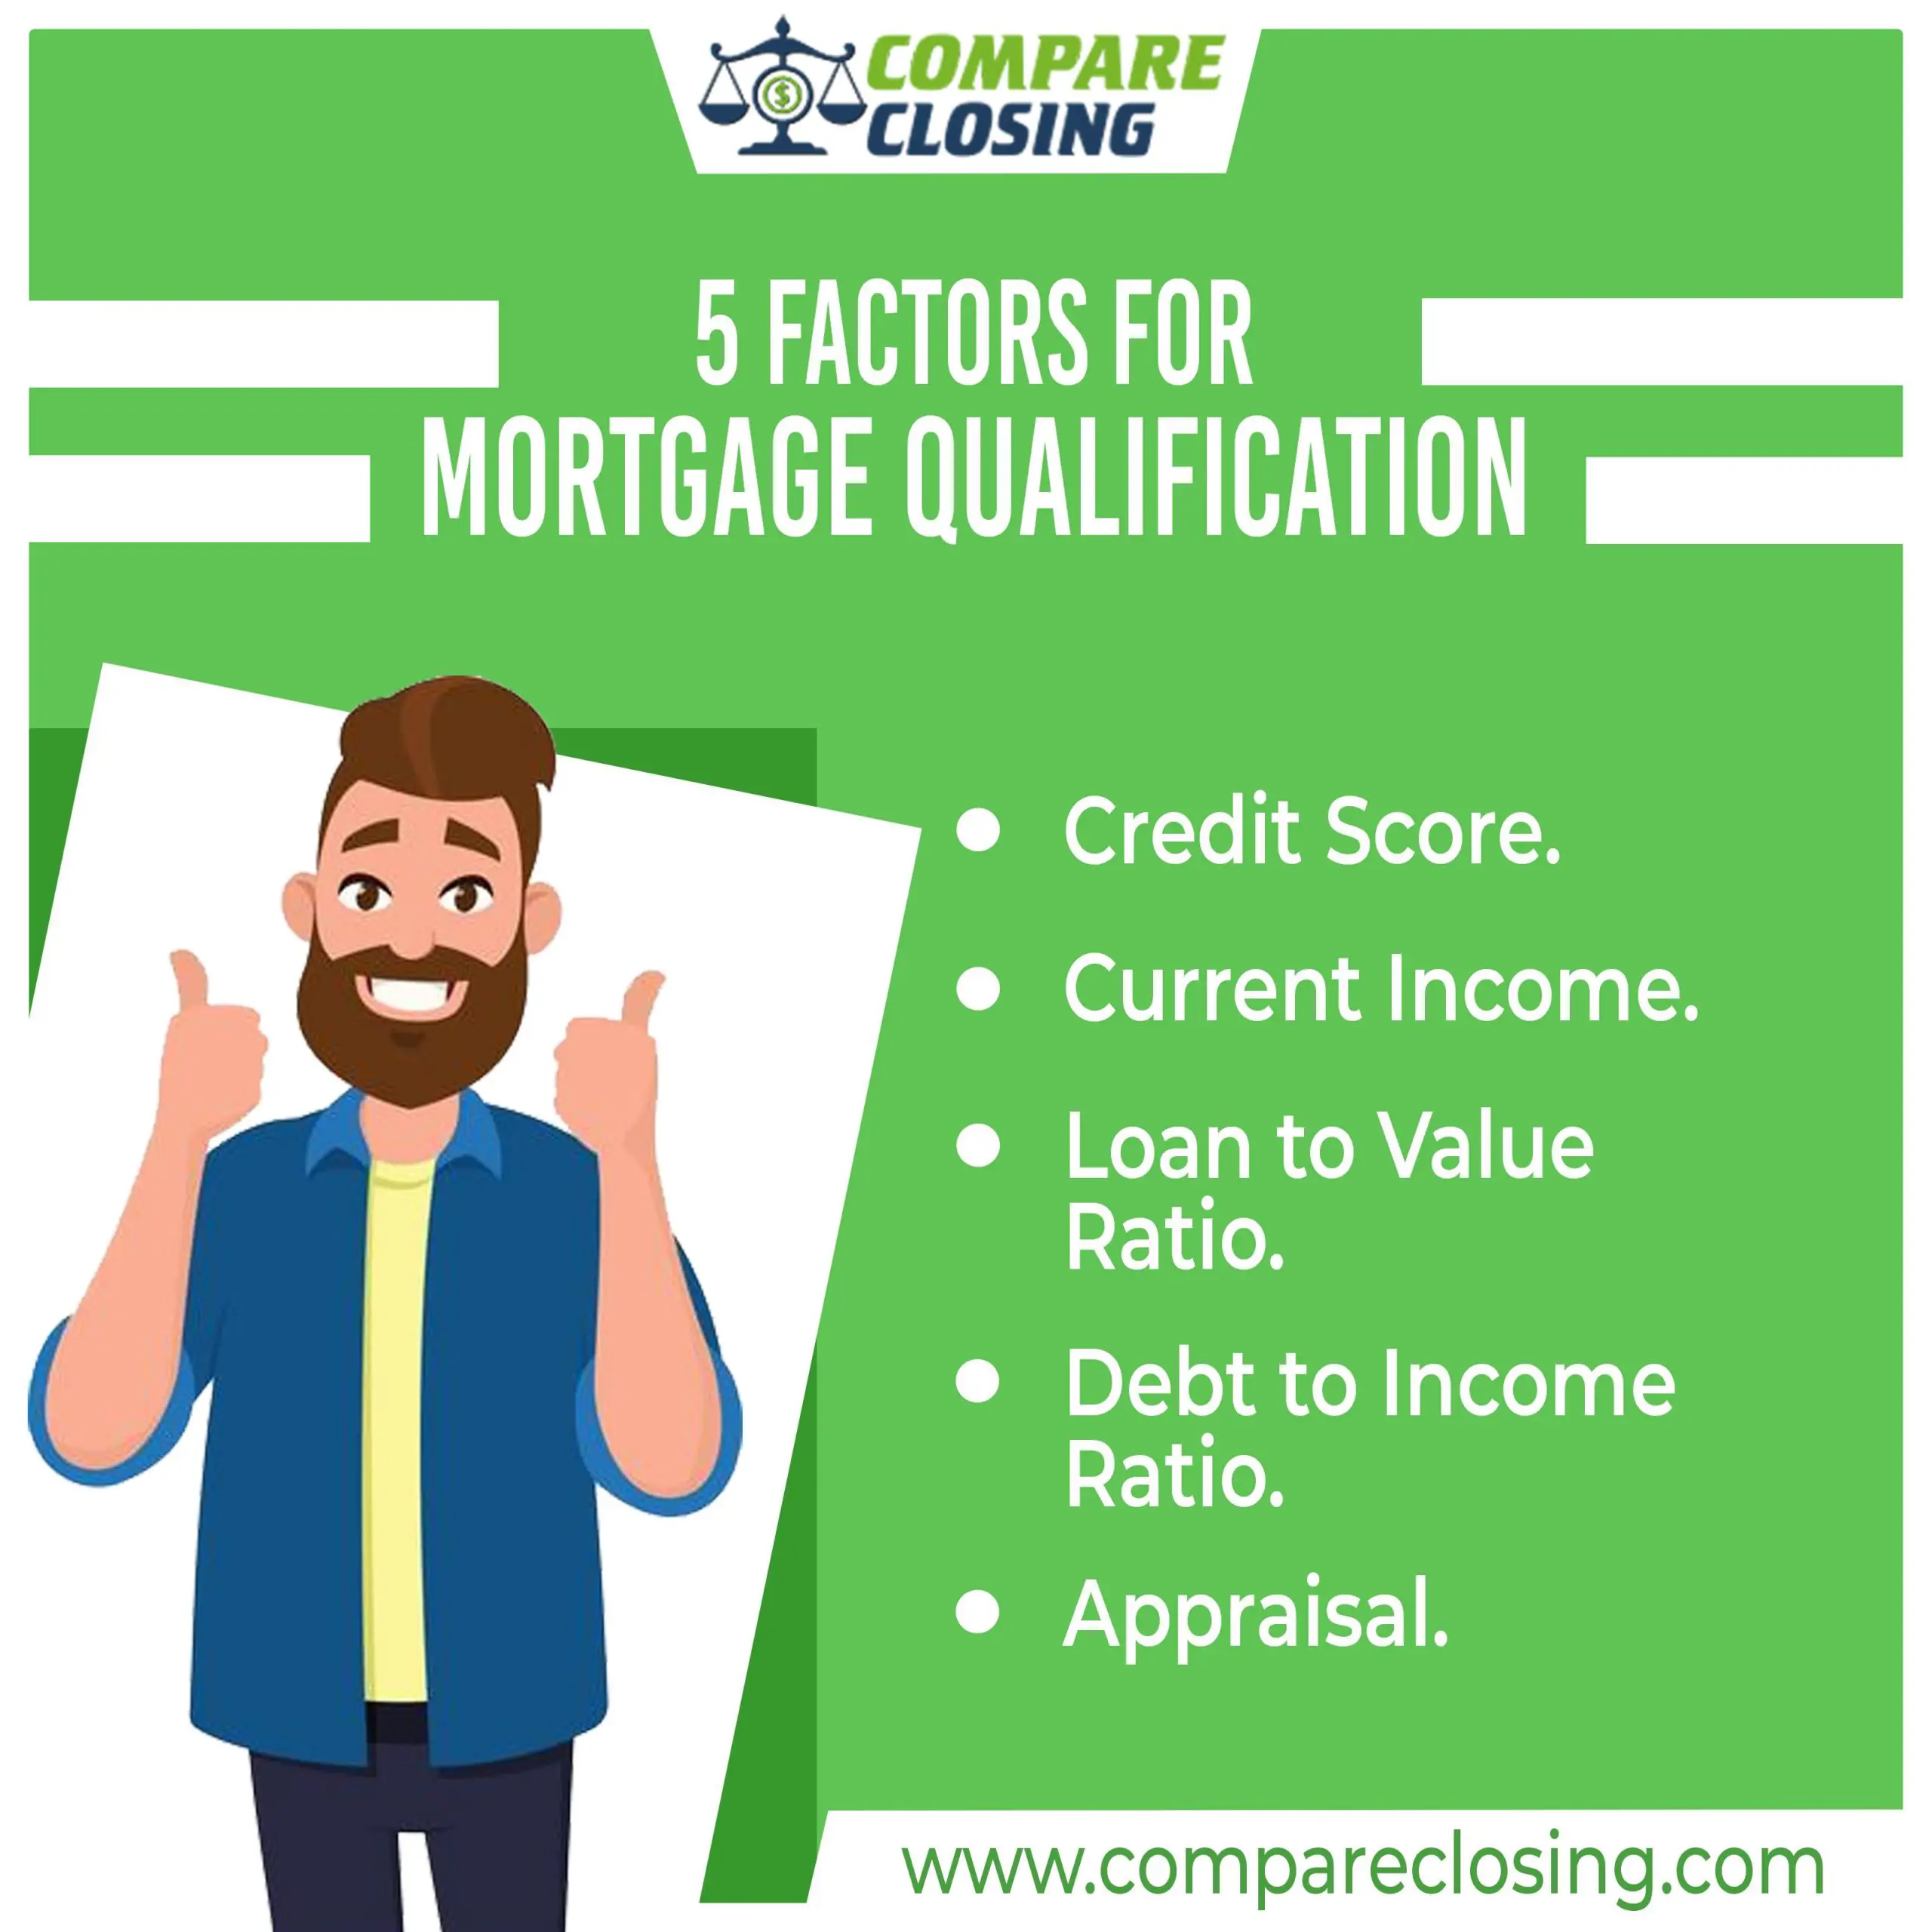 5 Factors for Mortgage Qualification.